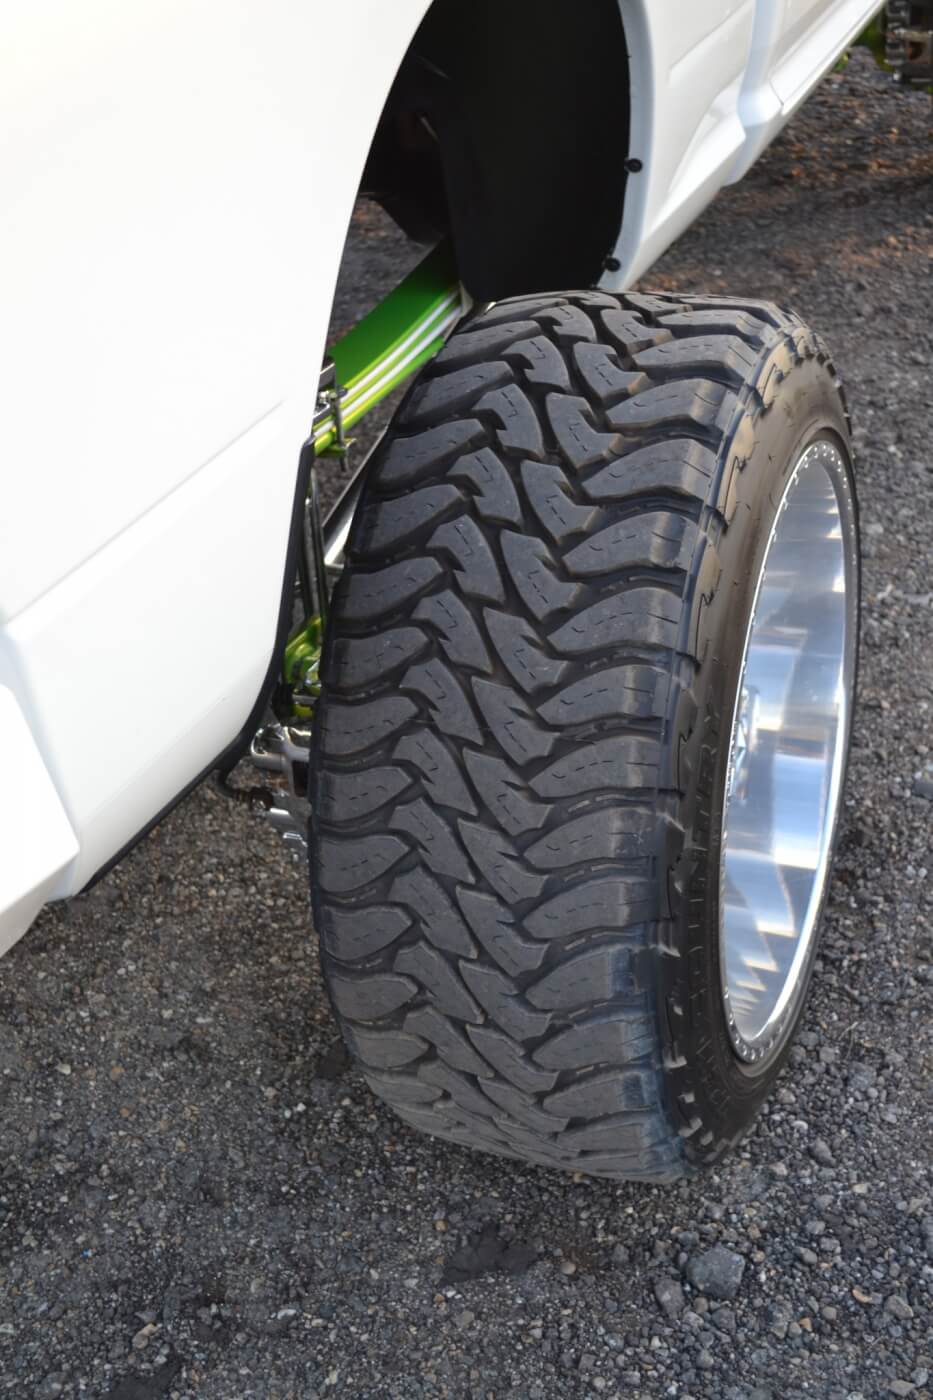 In this photo, one can see how far the wheels are set out for the famous "Cent-Cal" stance. The tires that give traction for towing, racing, or pulling, are the same 37x13.50R24 Toyo Mud Terrains.